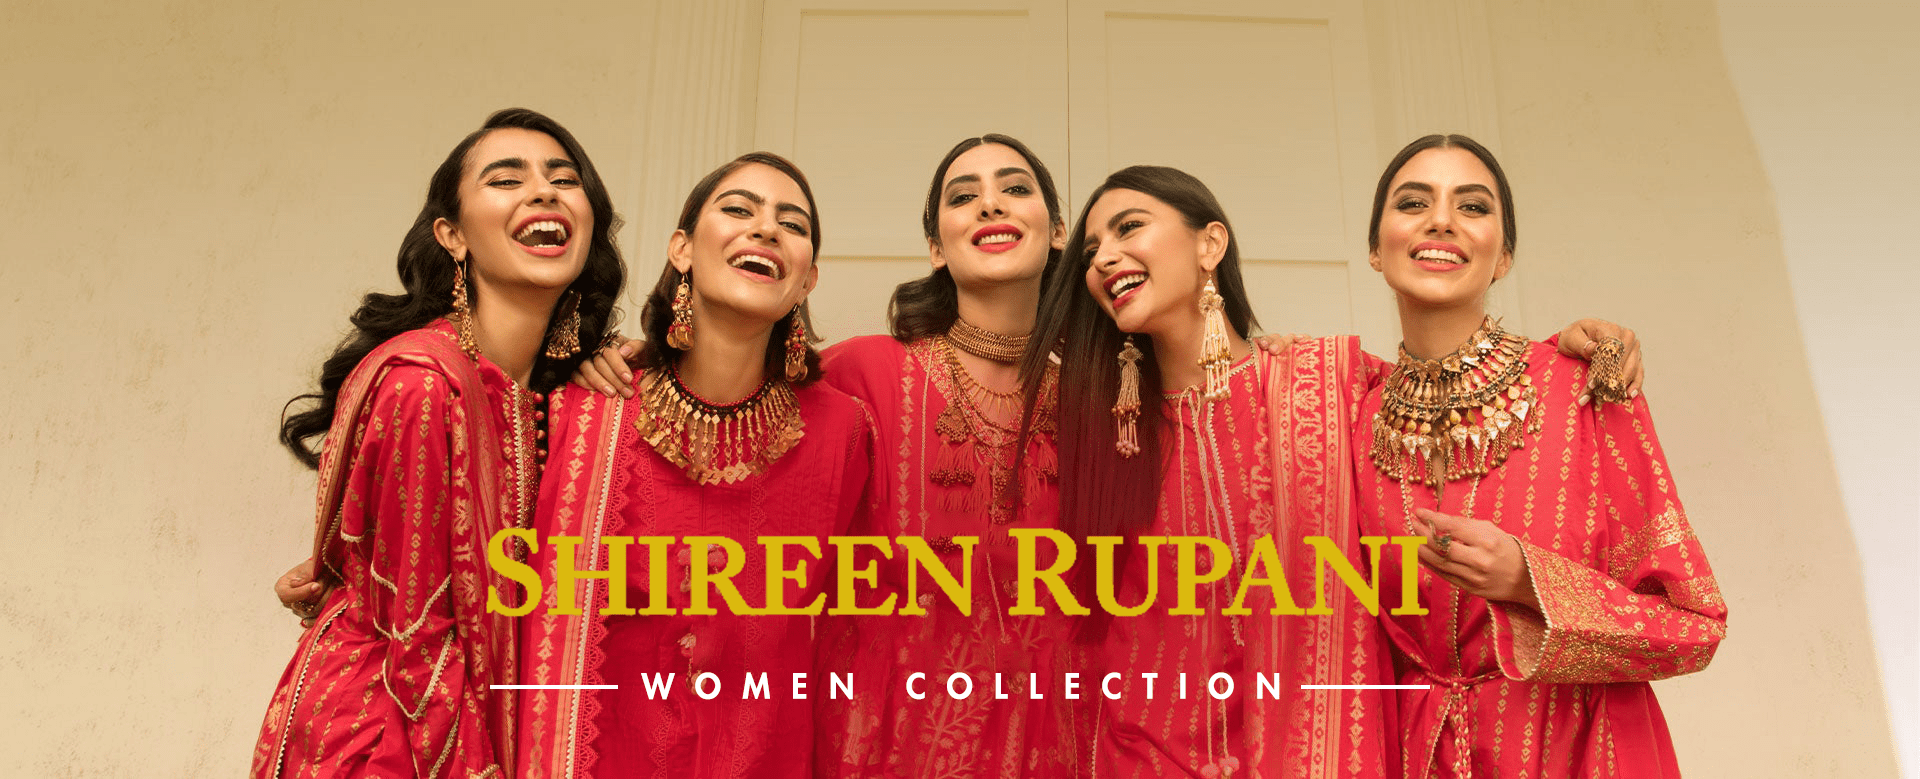 WOMEN COLLECTION MAIN